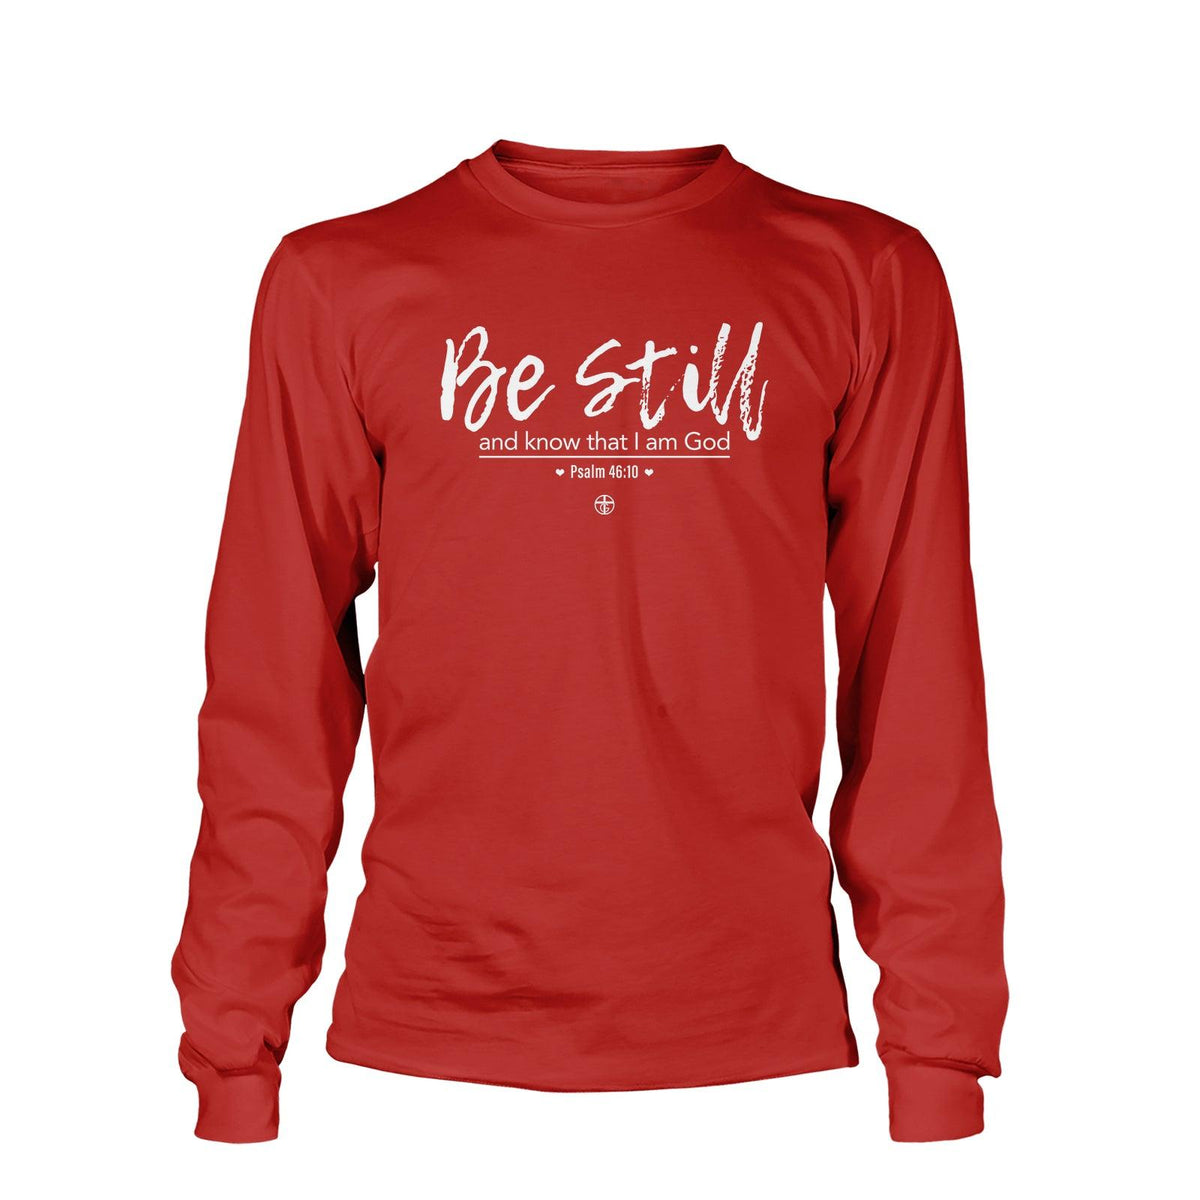 Ps 46:10 Long Sleeve T-Shirt - Our True God